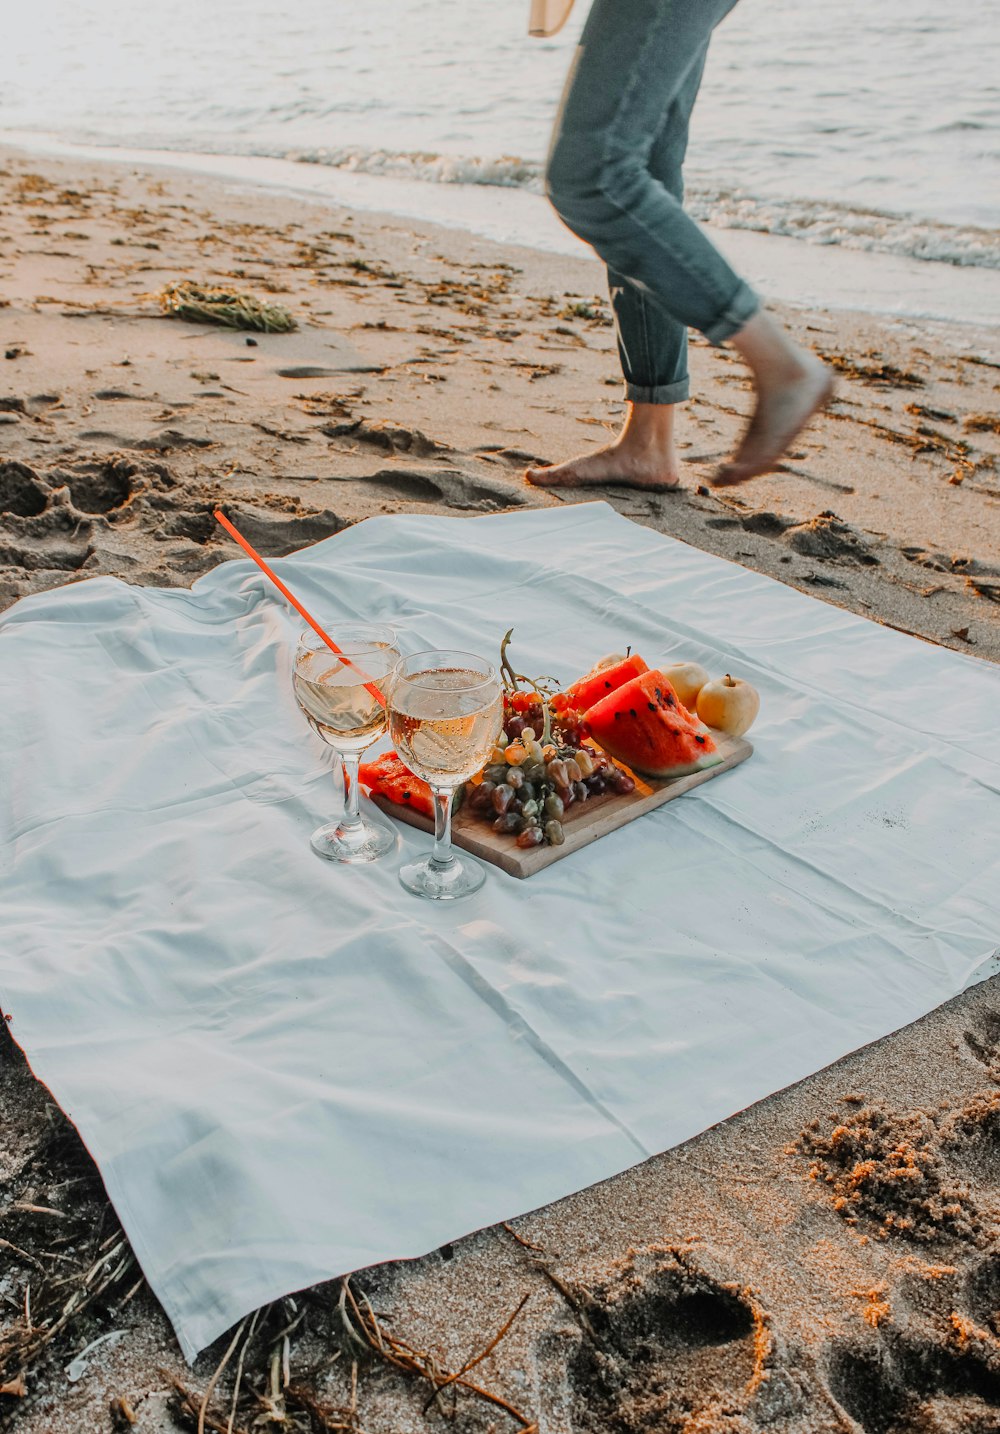 a plate of food on a blanket on the beach